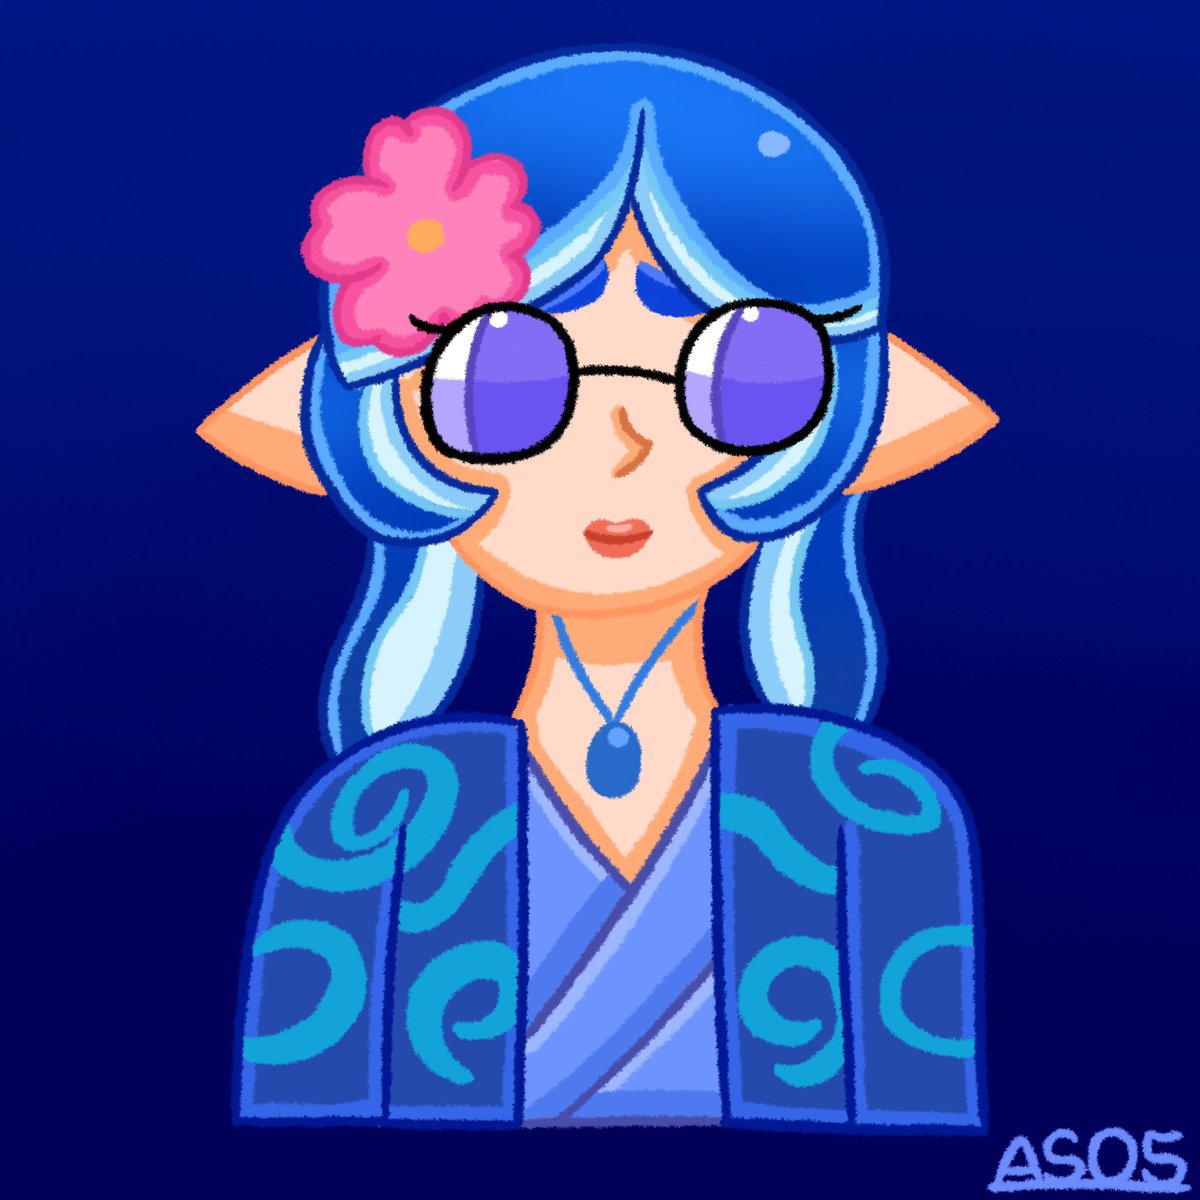 Introducing, Caroline’s long lost biological mother Harumi. 

I’ve been wanting to give my main OCs parents a second chance as they were obscure, and honestly I’m very happy with this one.

💙/🔄s are welcomed!

#ArtistOnTwitter #OCArt #SplatoonArt #AS05